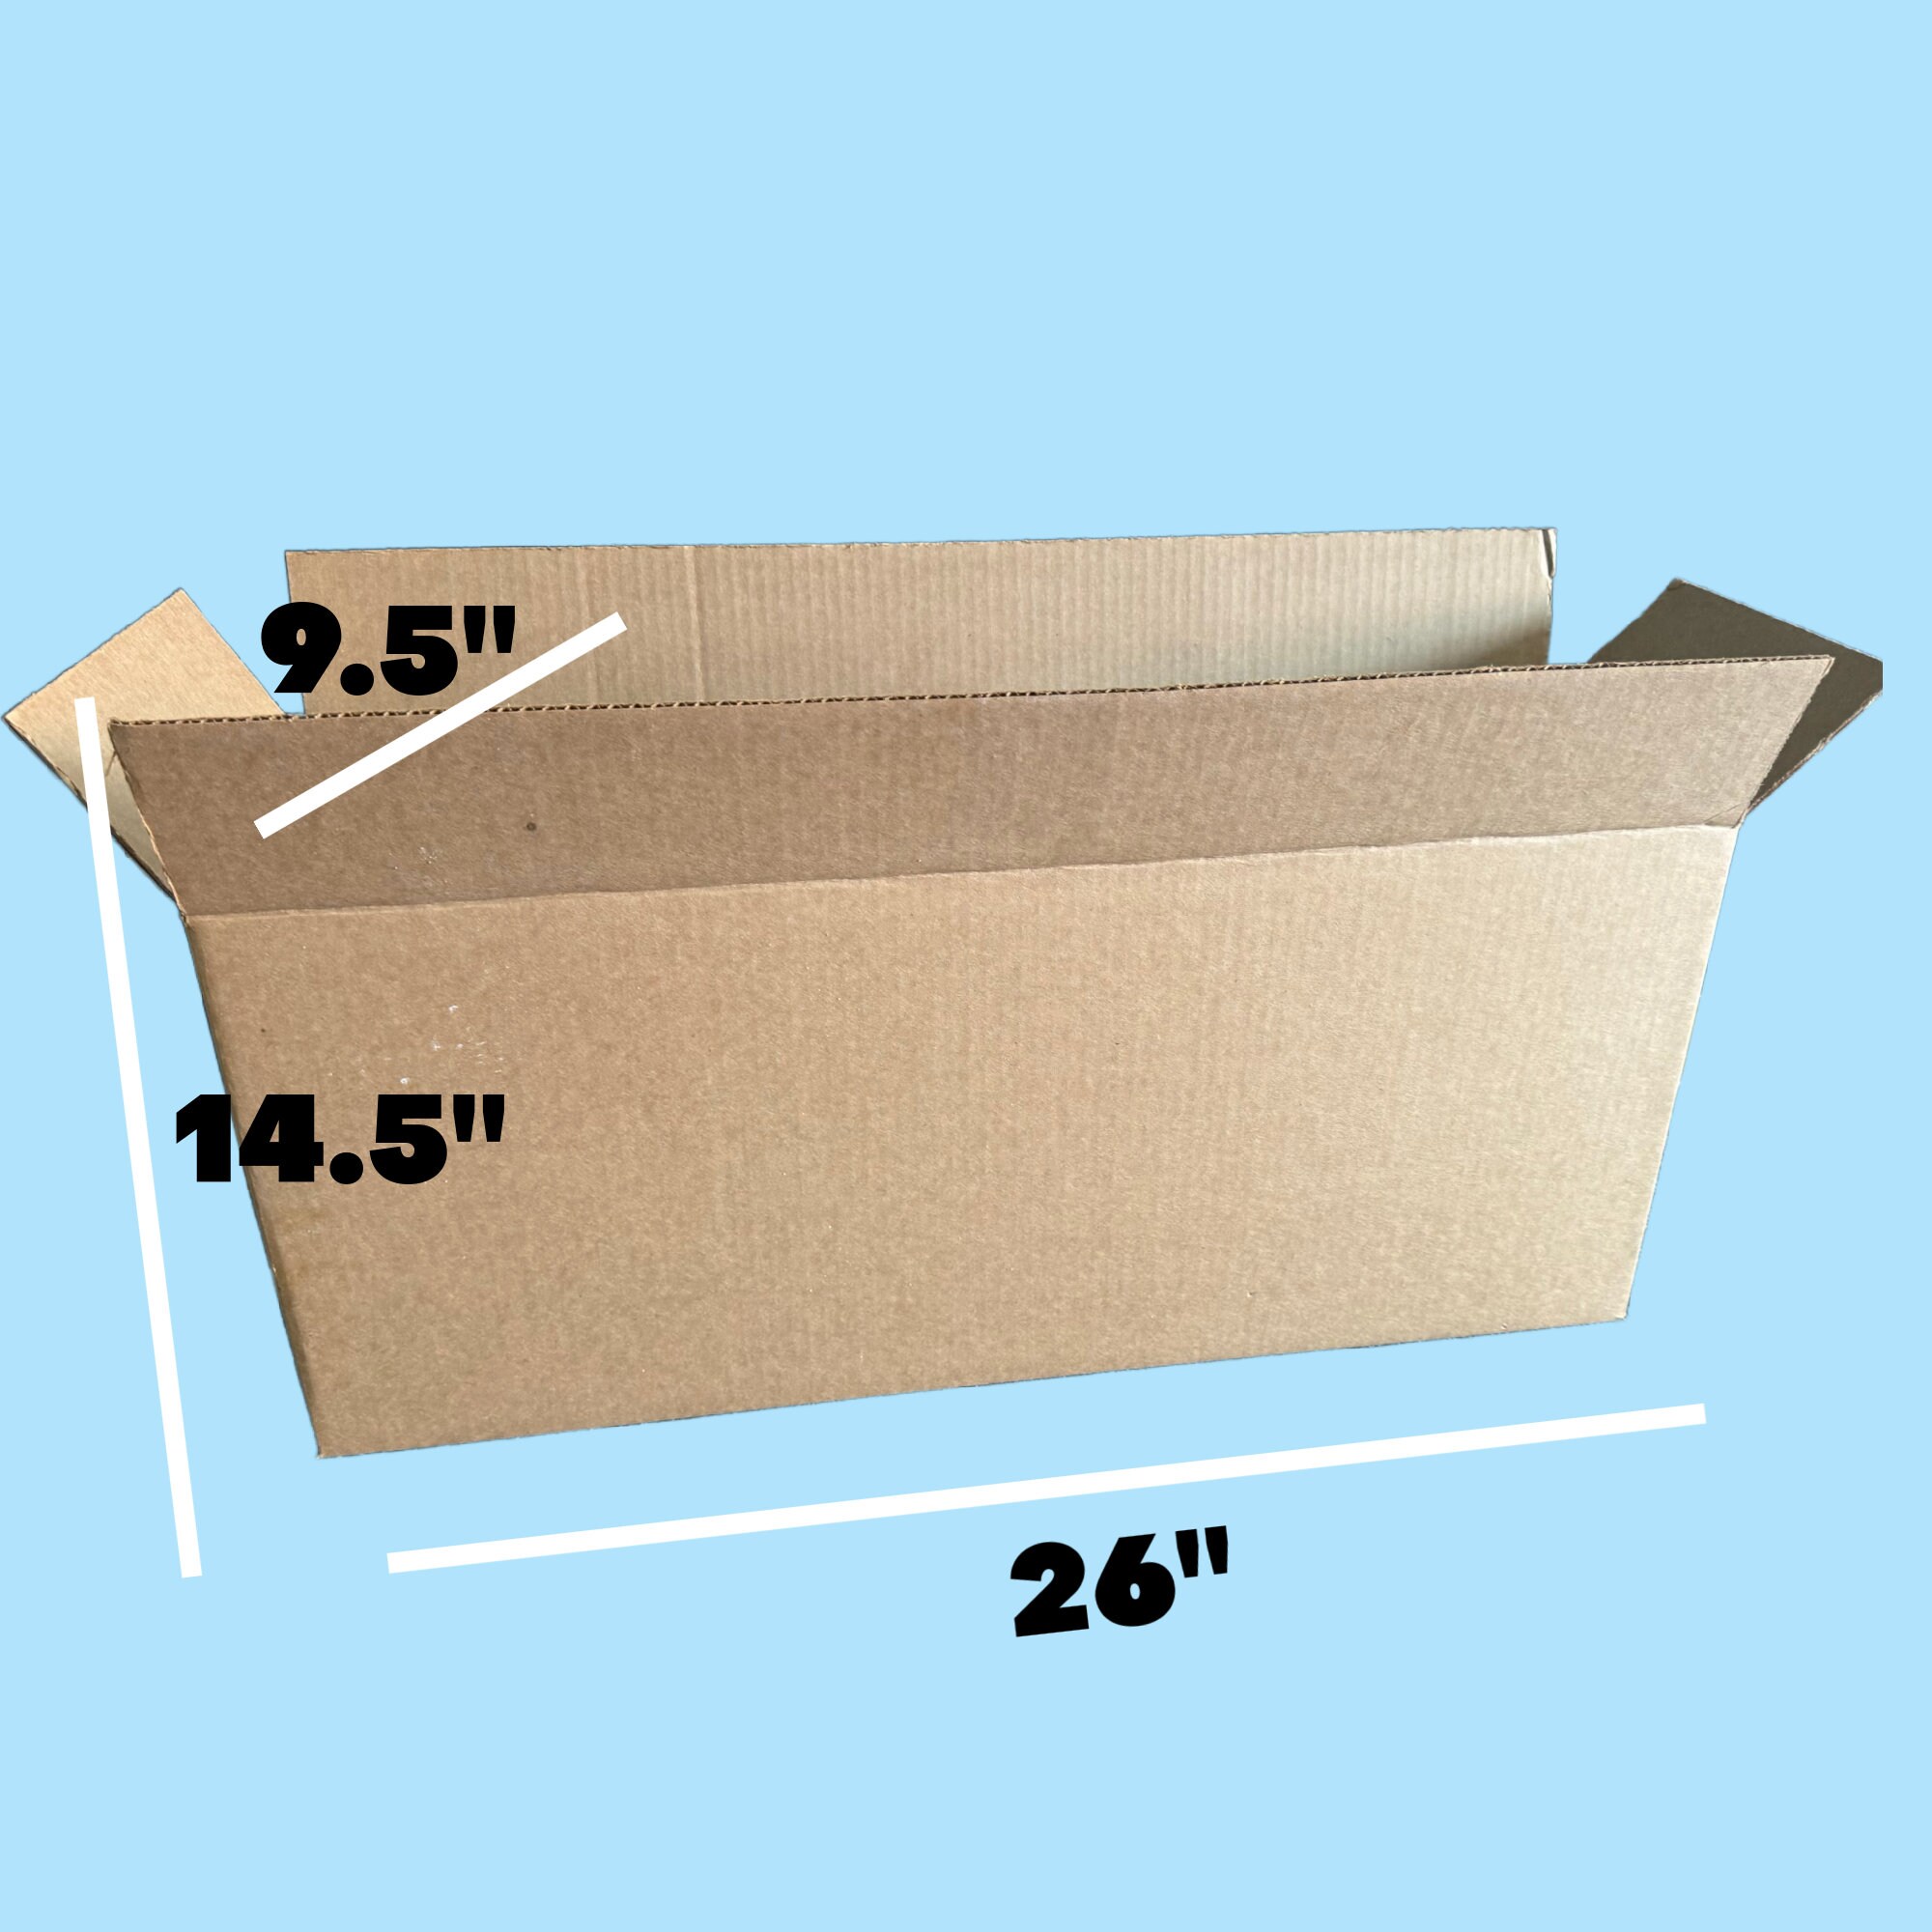 50 Pack White Corrugated Shipping Mailer Small Packaging Packing Boxes 4x3x2”